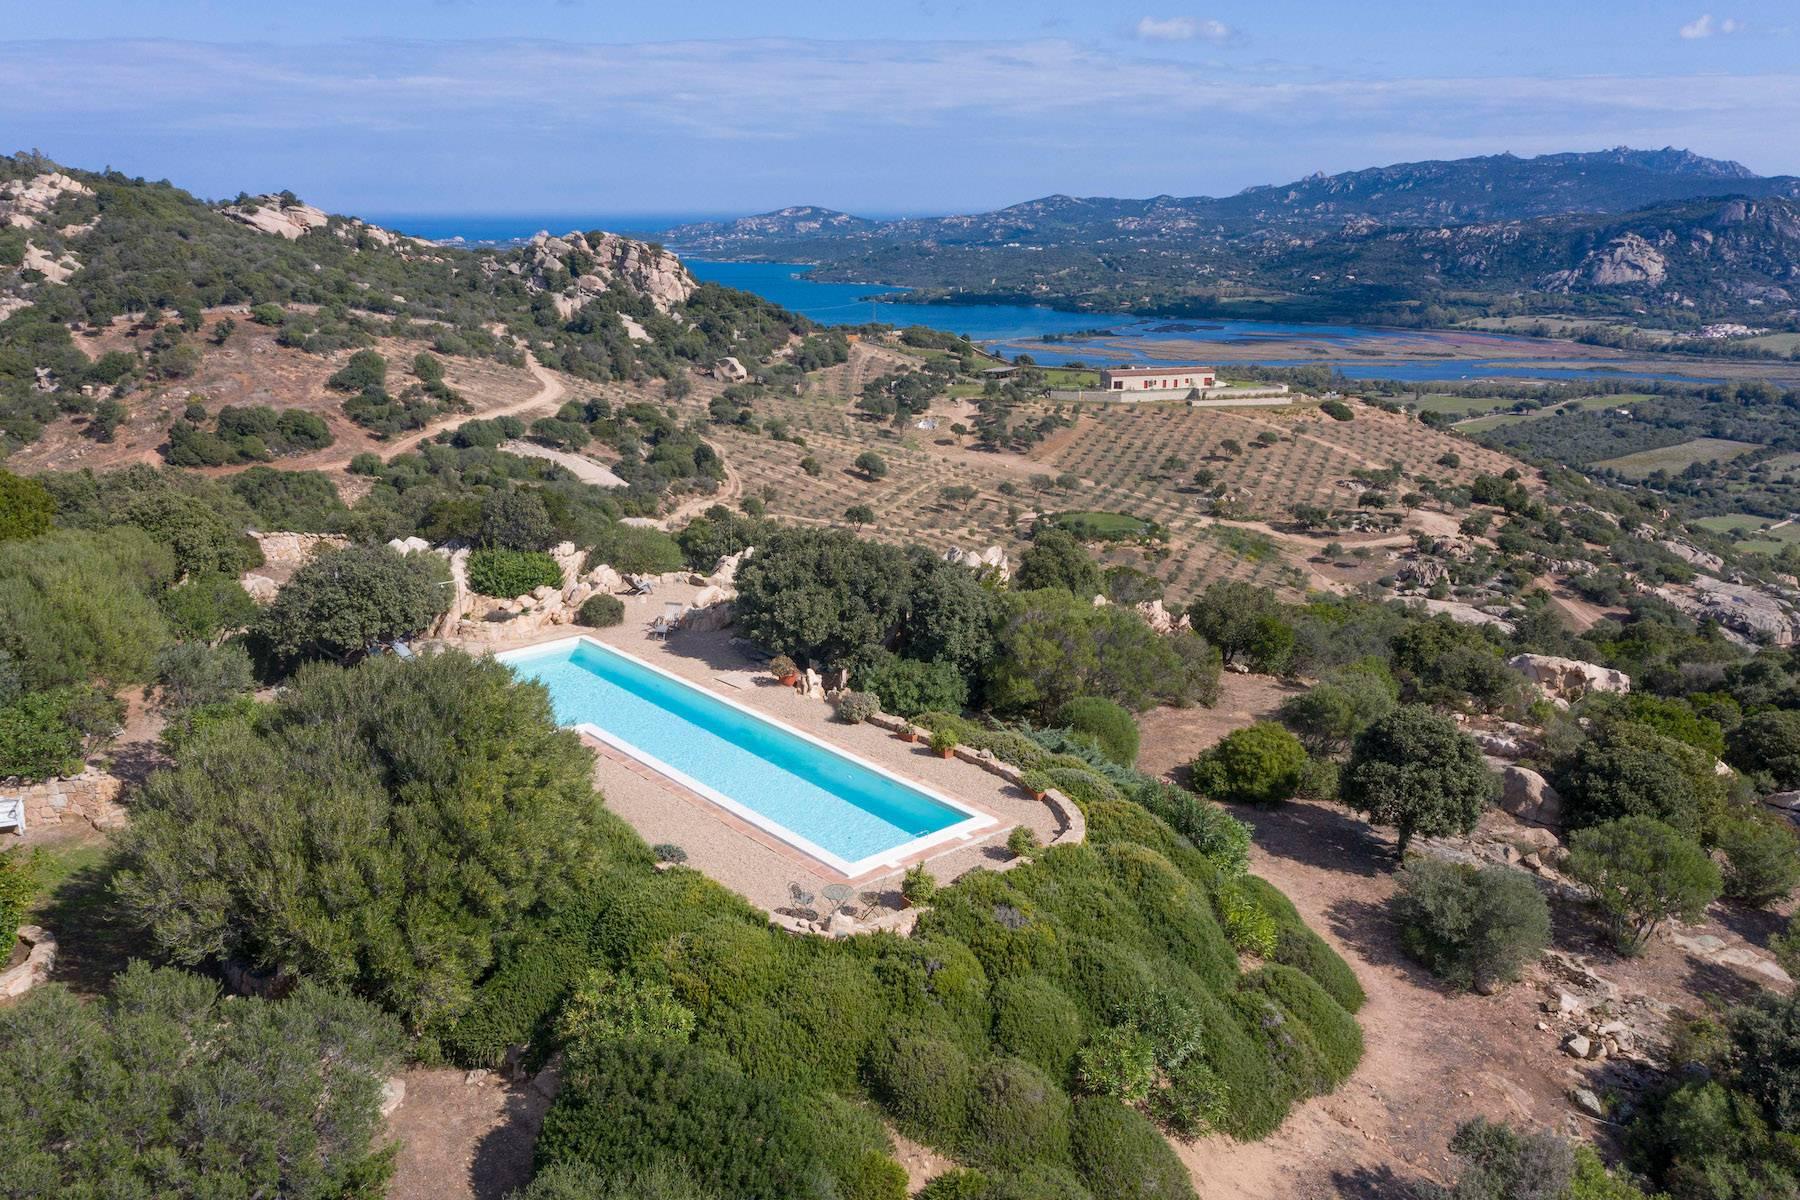 Splendid estate, surrounded by Mediterranean vegetation, overlooking the Gulf of Cannigione - 5